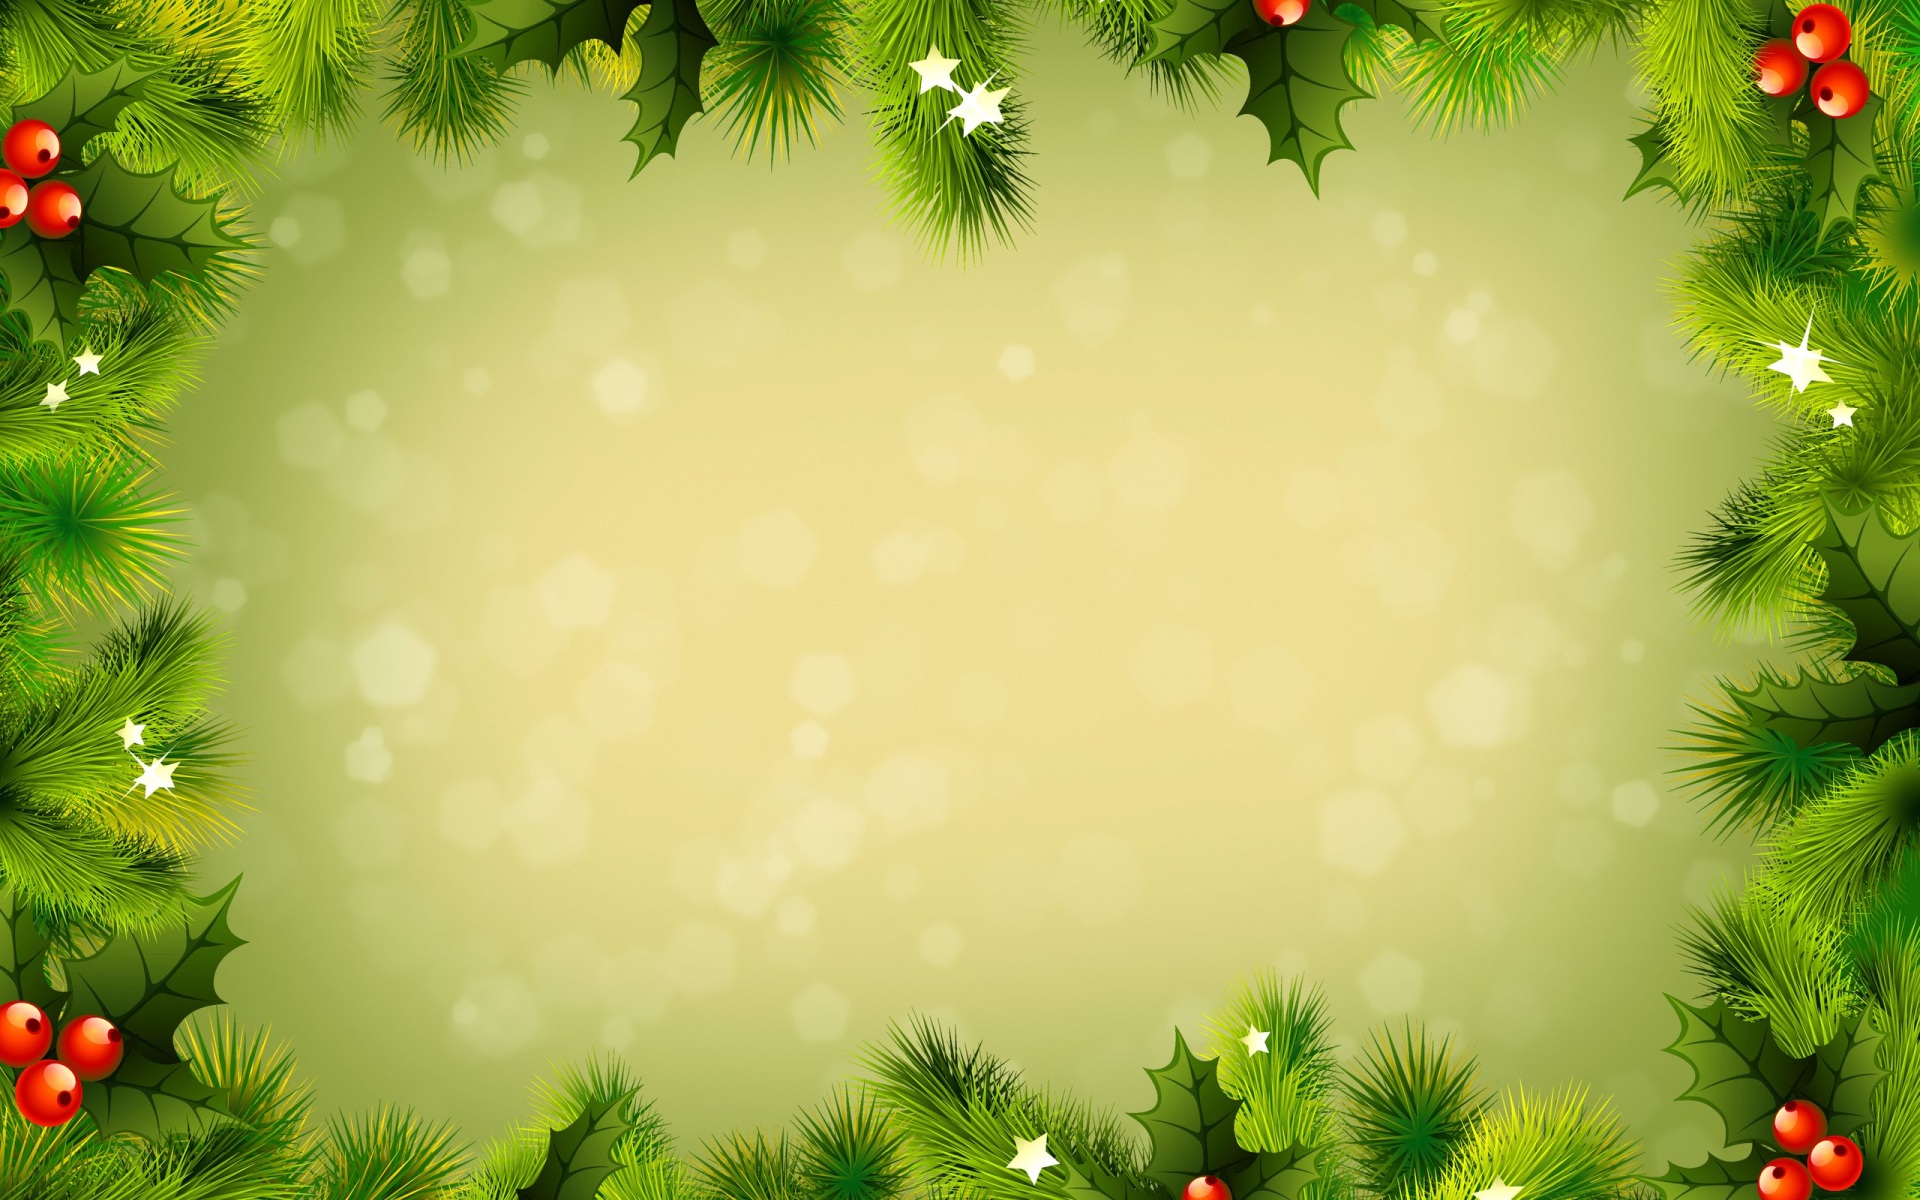 Christmas Background Images Free Christmas Backgrounds